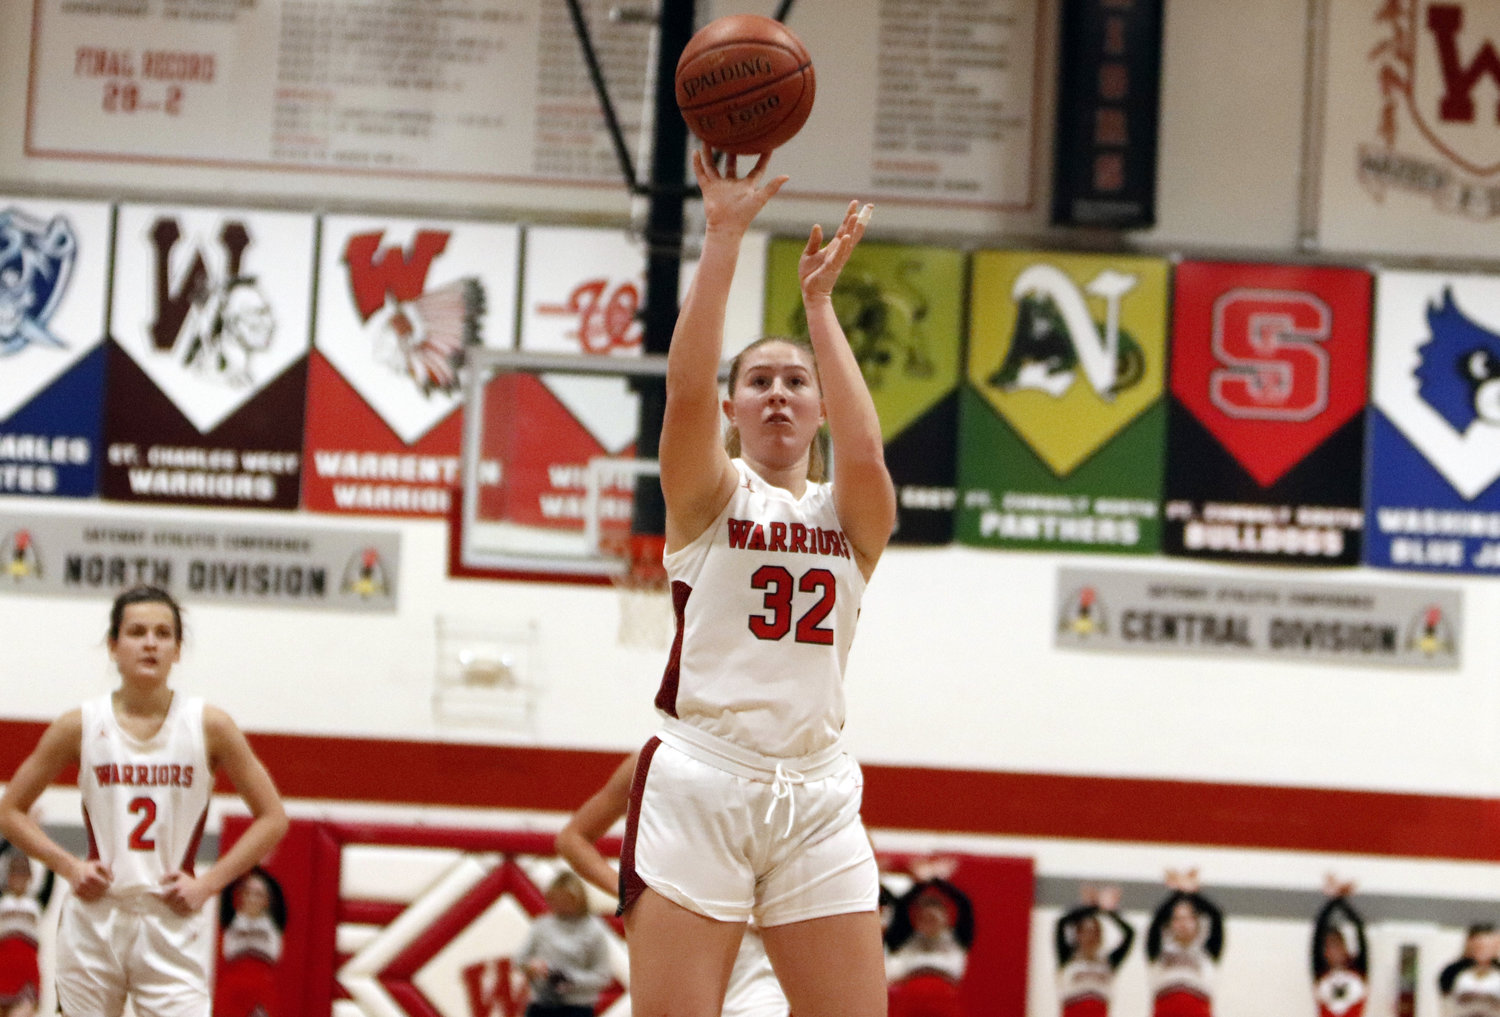 Kaelyn Meyer shoots a free throw during Warrenton's win over Hallsville.